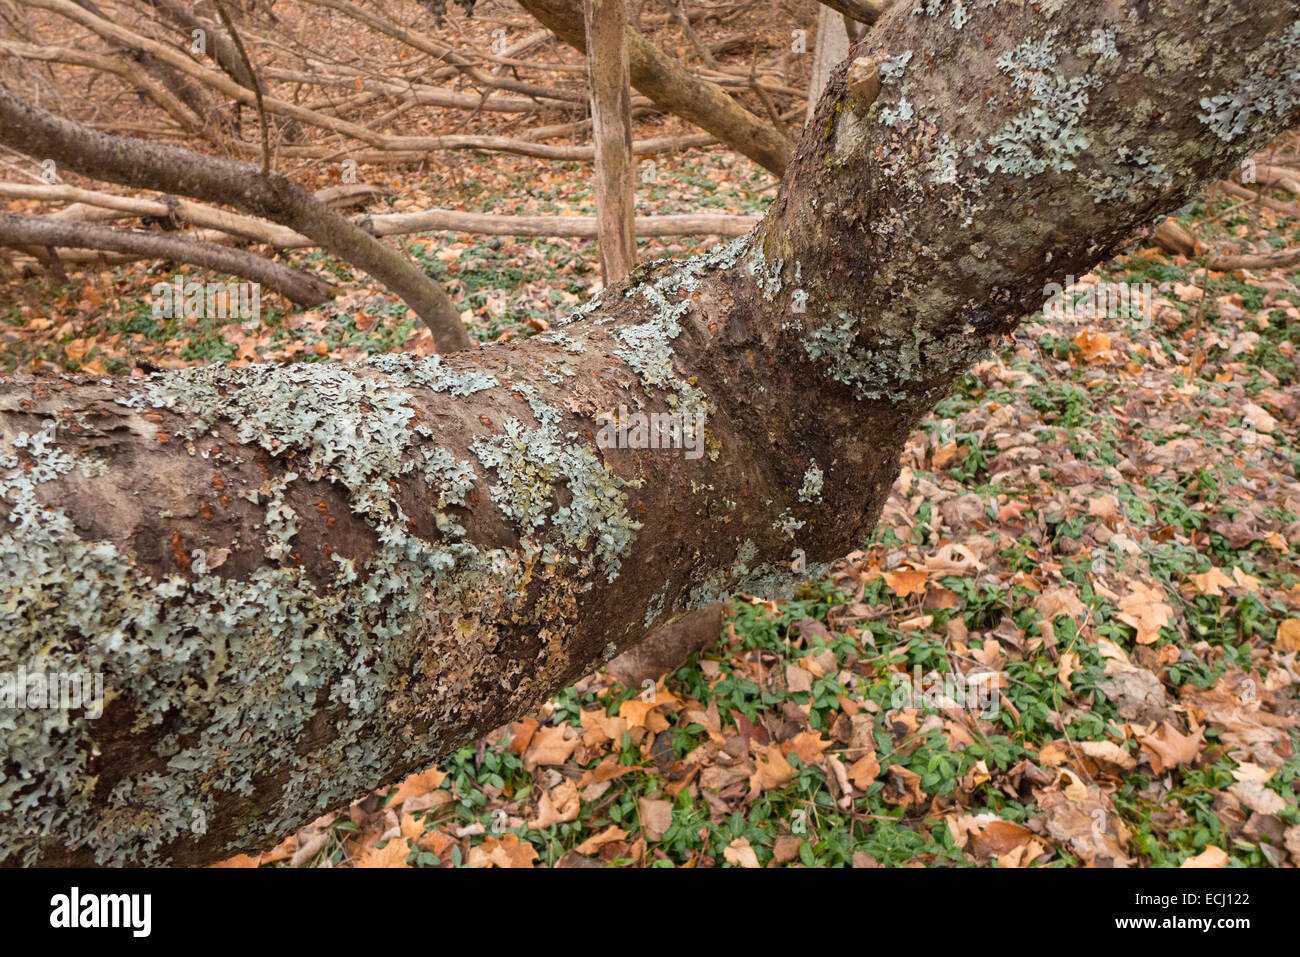 Dead tree covered with lichen. Stock Photo